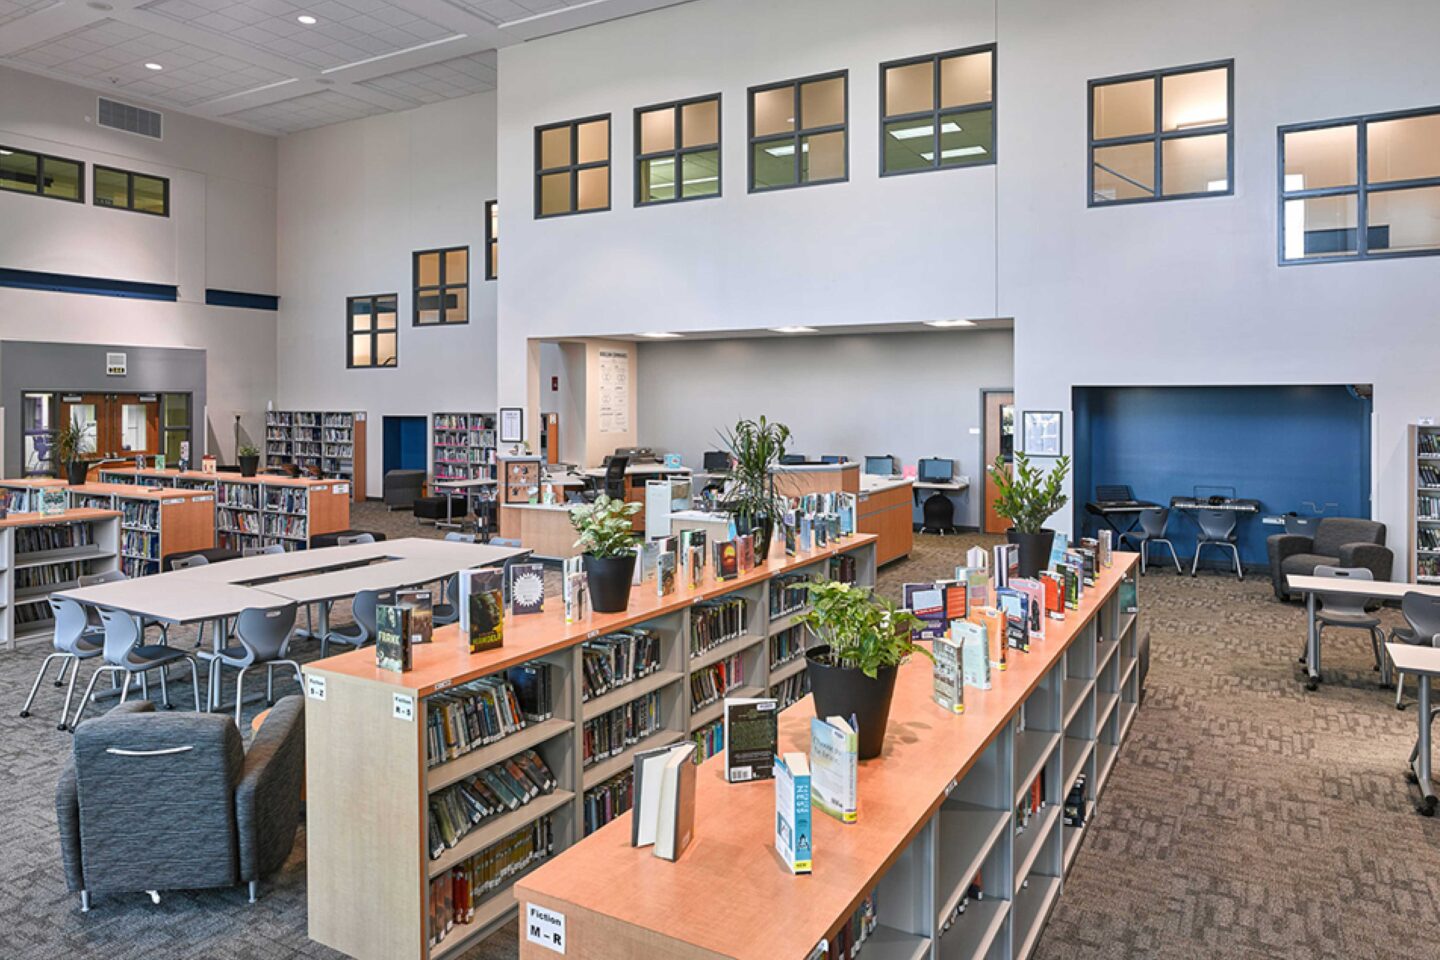 A view of the library, including reading nooks and windows that visually connect the library to the second floor learning areas